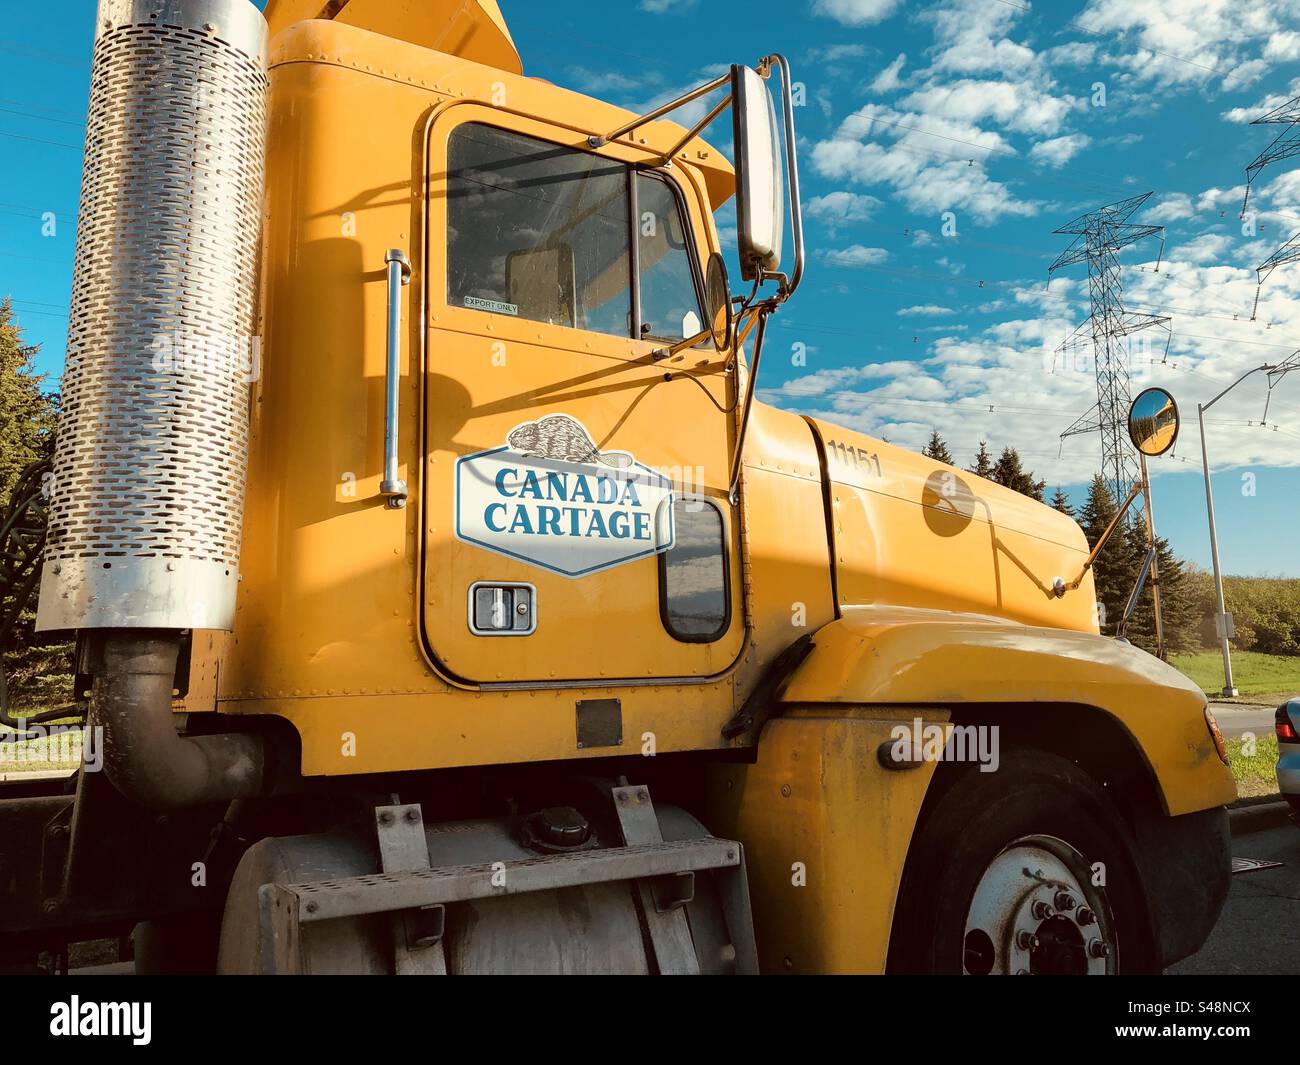 Yellow Canada Cartage truck on an azure blue cloudy sky Stock Photo